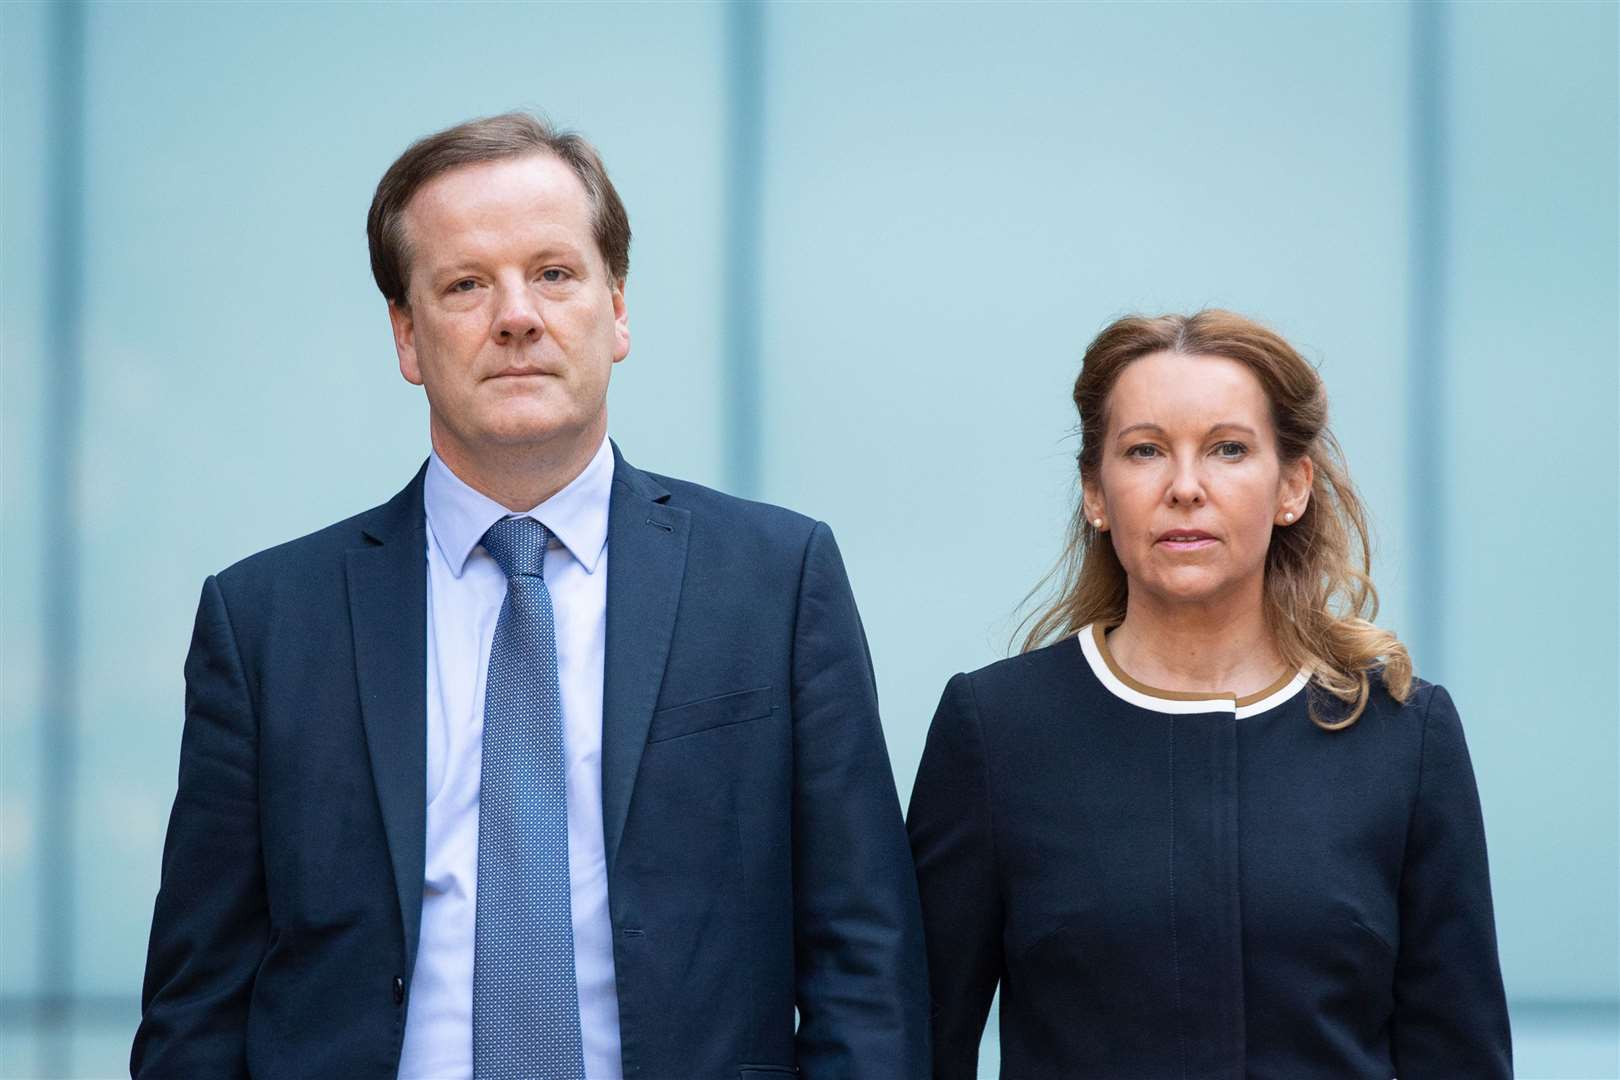 Charlie Elphicke’s wife Natalie was among those to sign a letter to senior judges urging them not to publish character statements (Dominic Lipinski/PA)